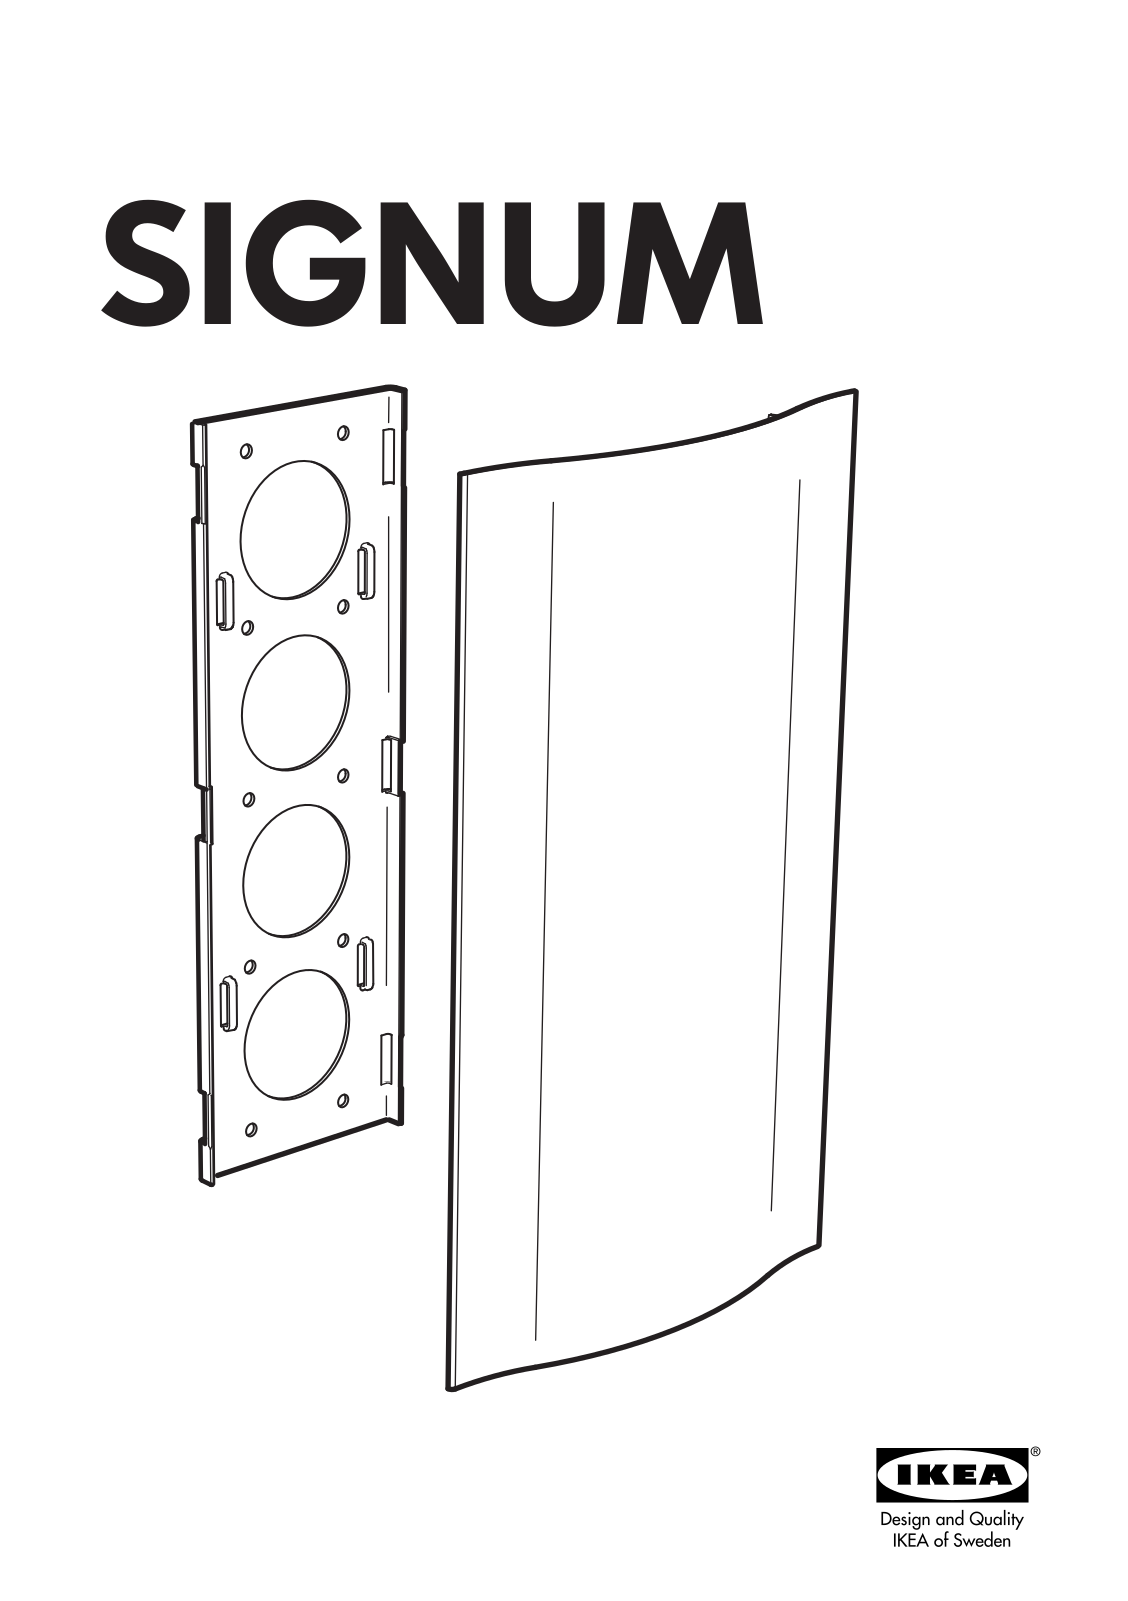 IKEA SIGNUM CORD COVER Assembly Instruction